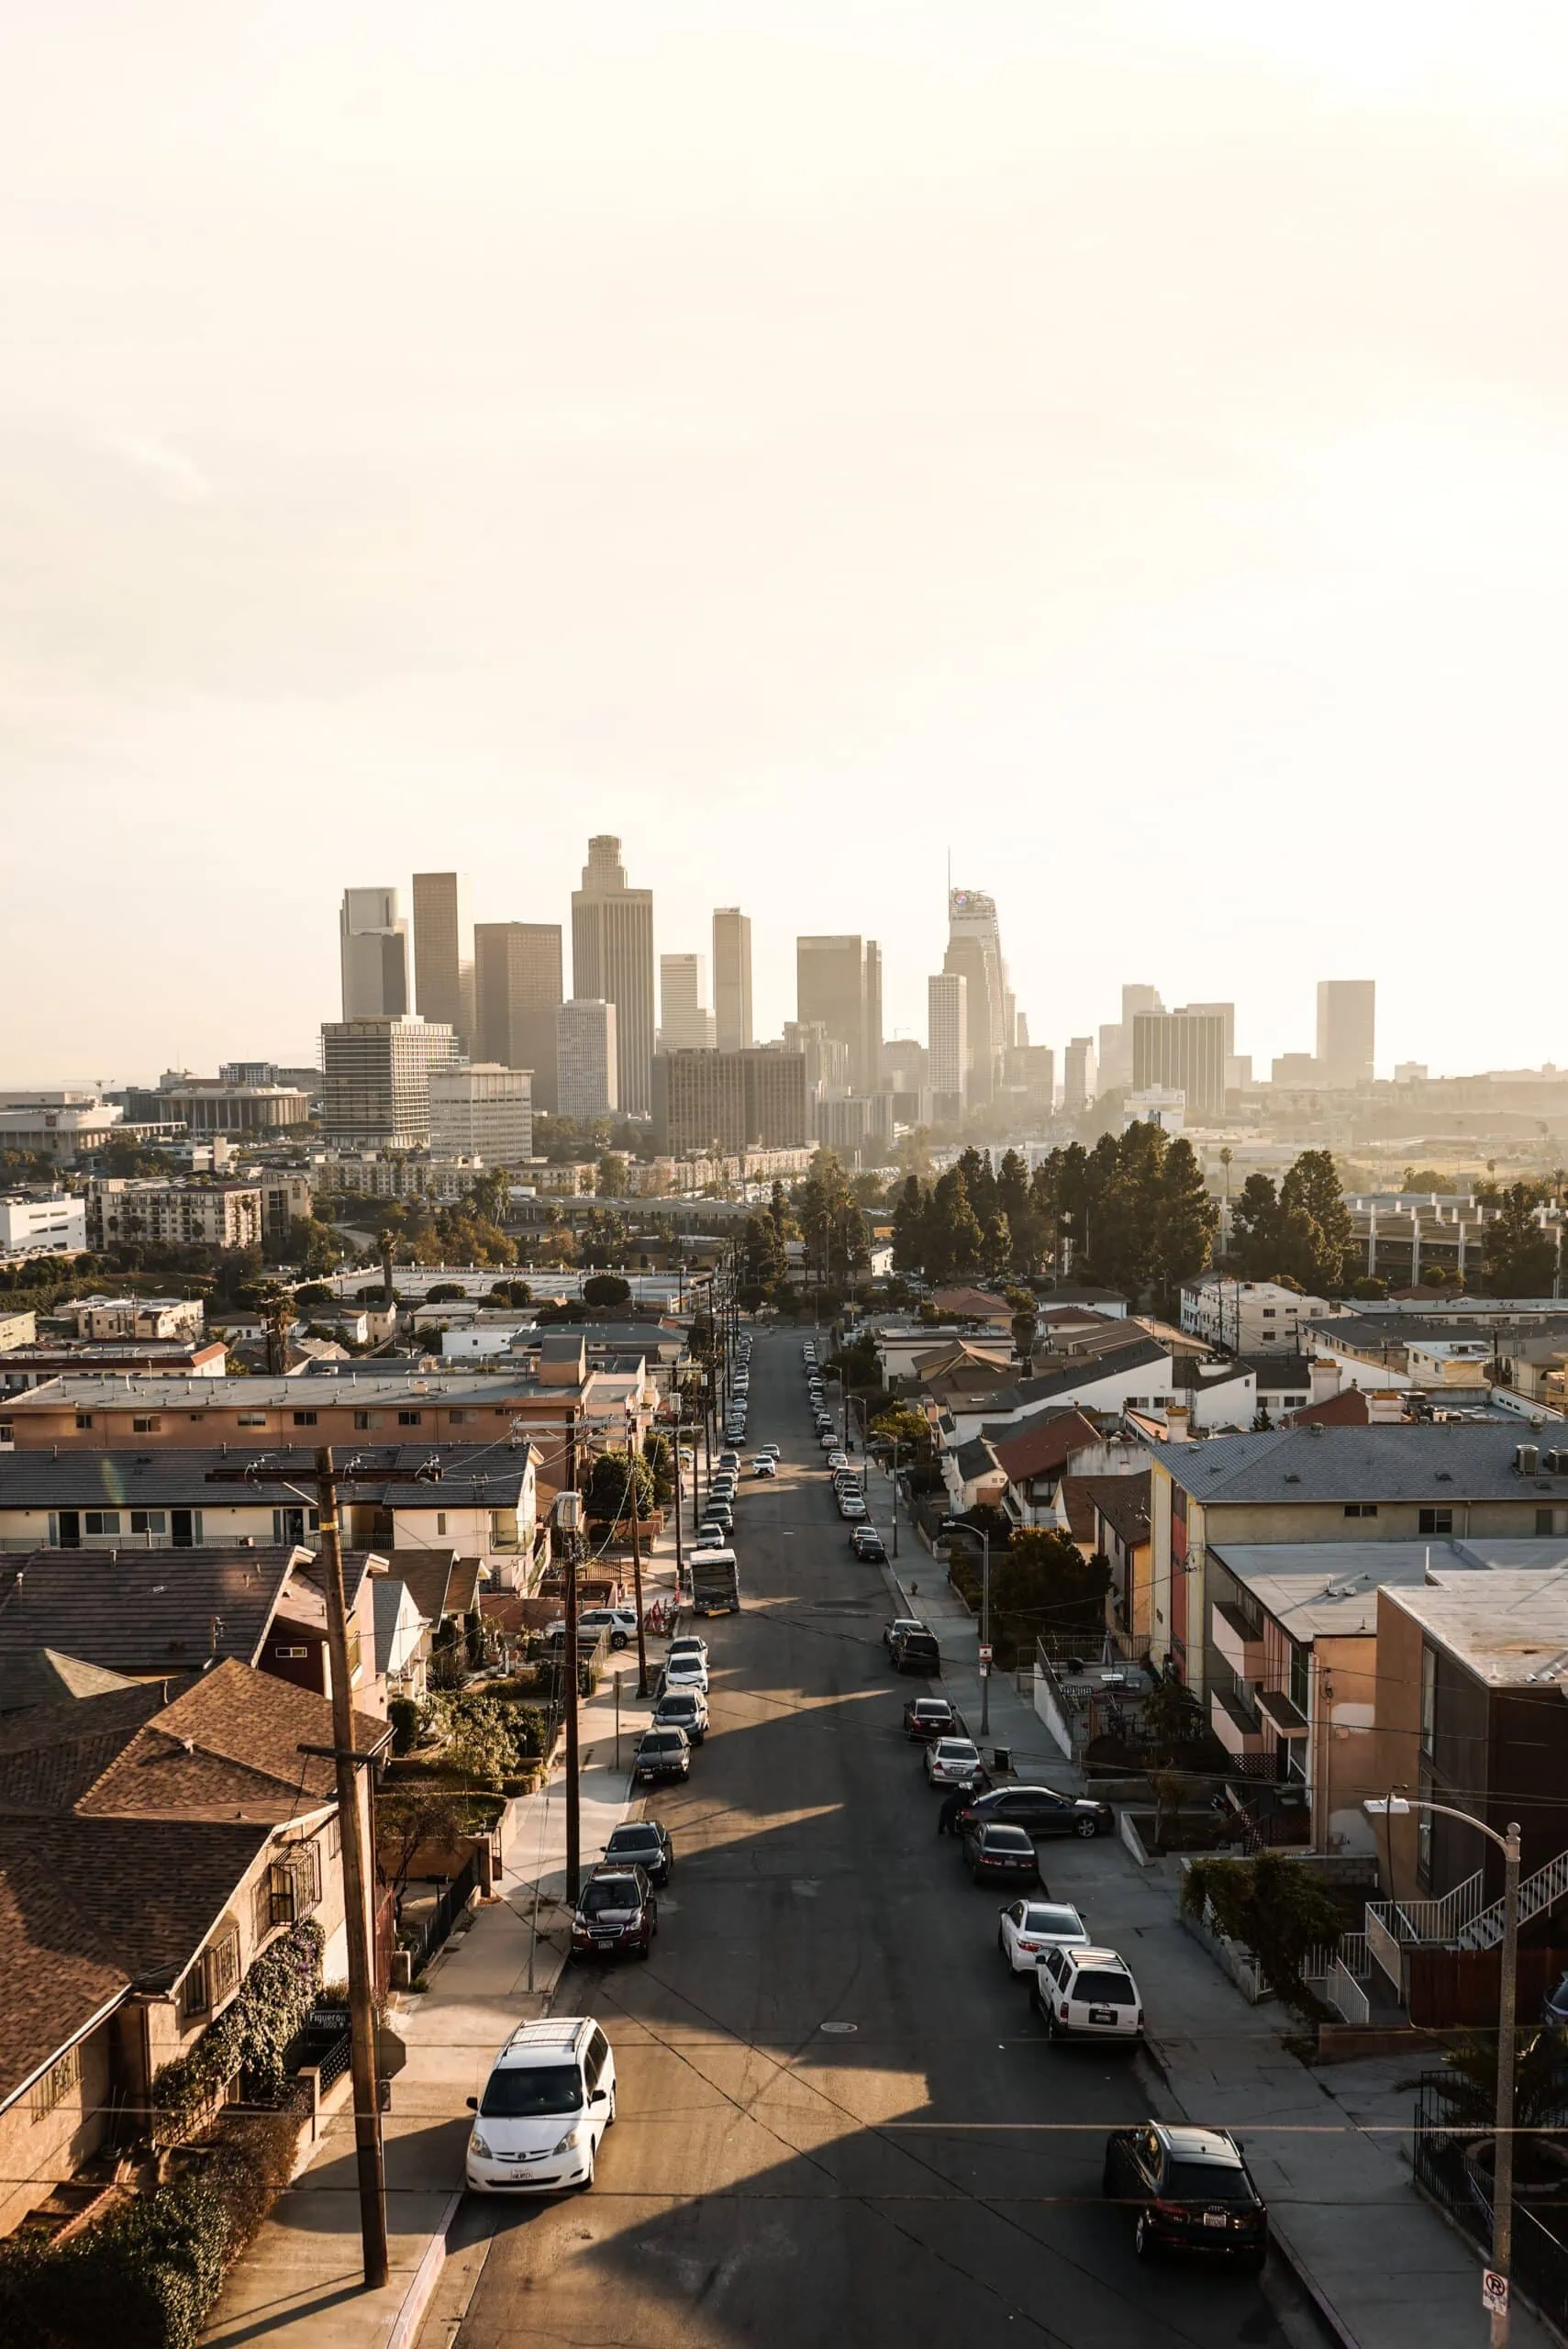 Neighborhood in Los Ángeles with businesses protected by security systems